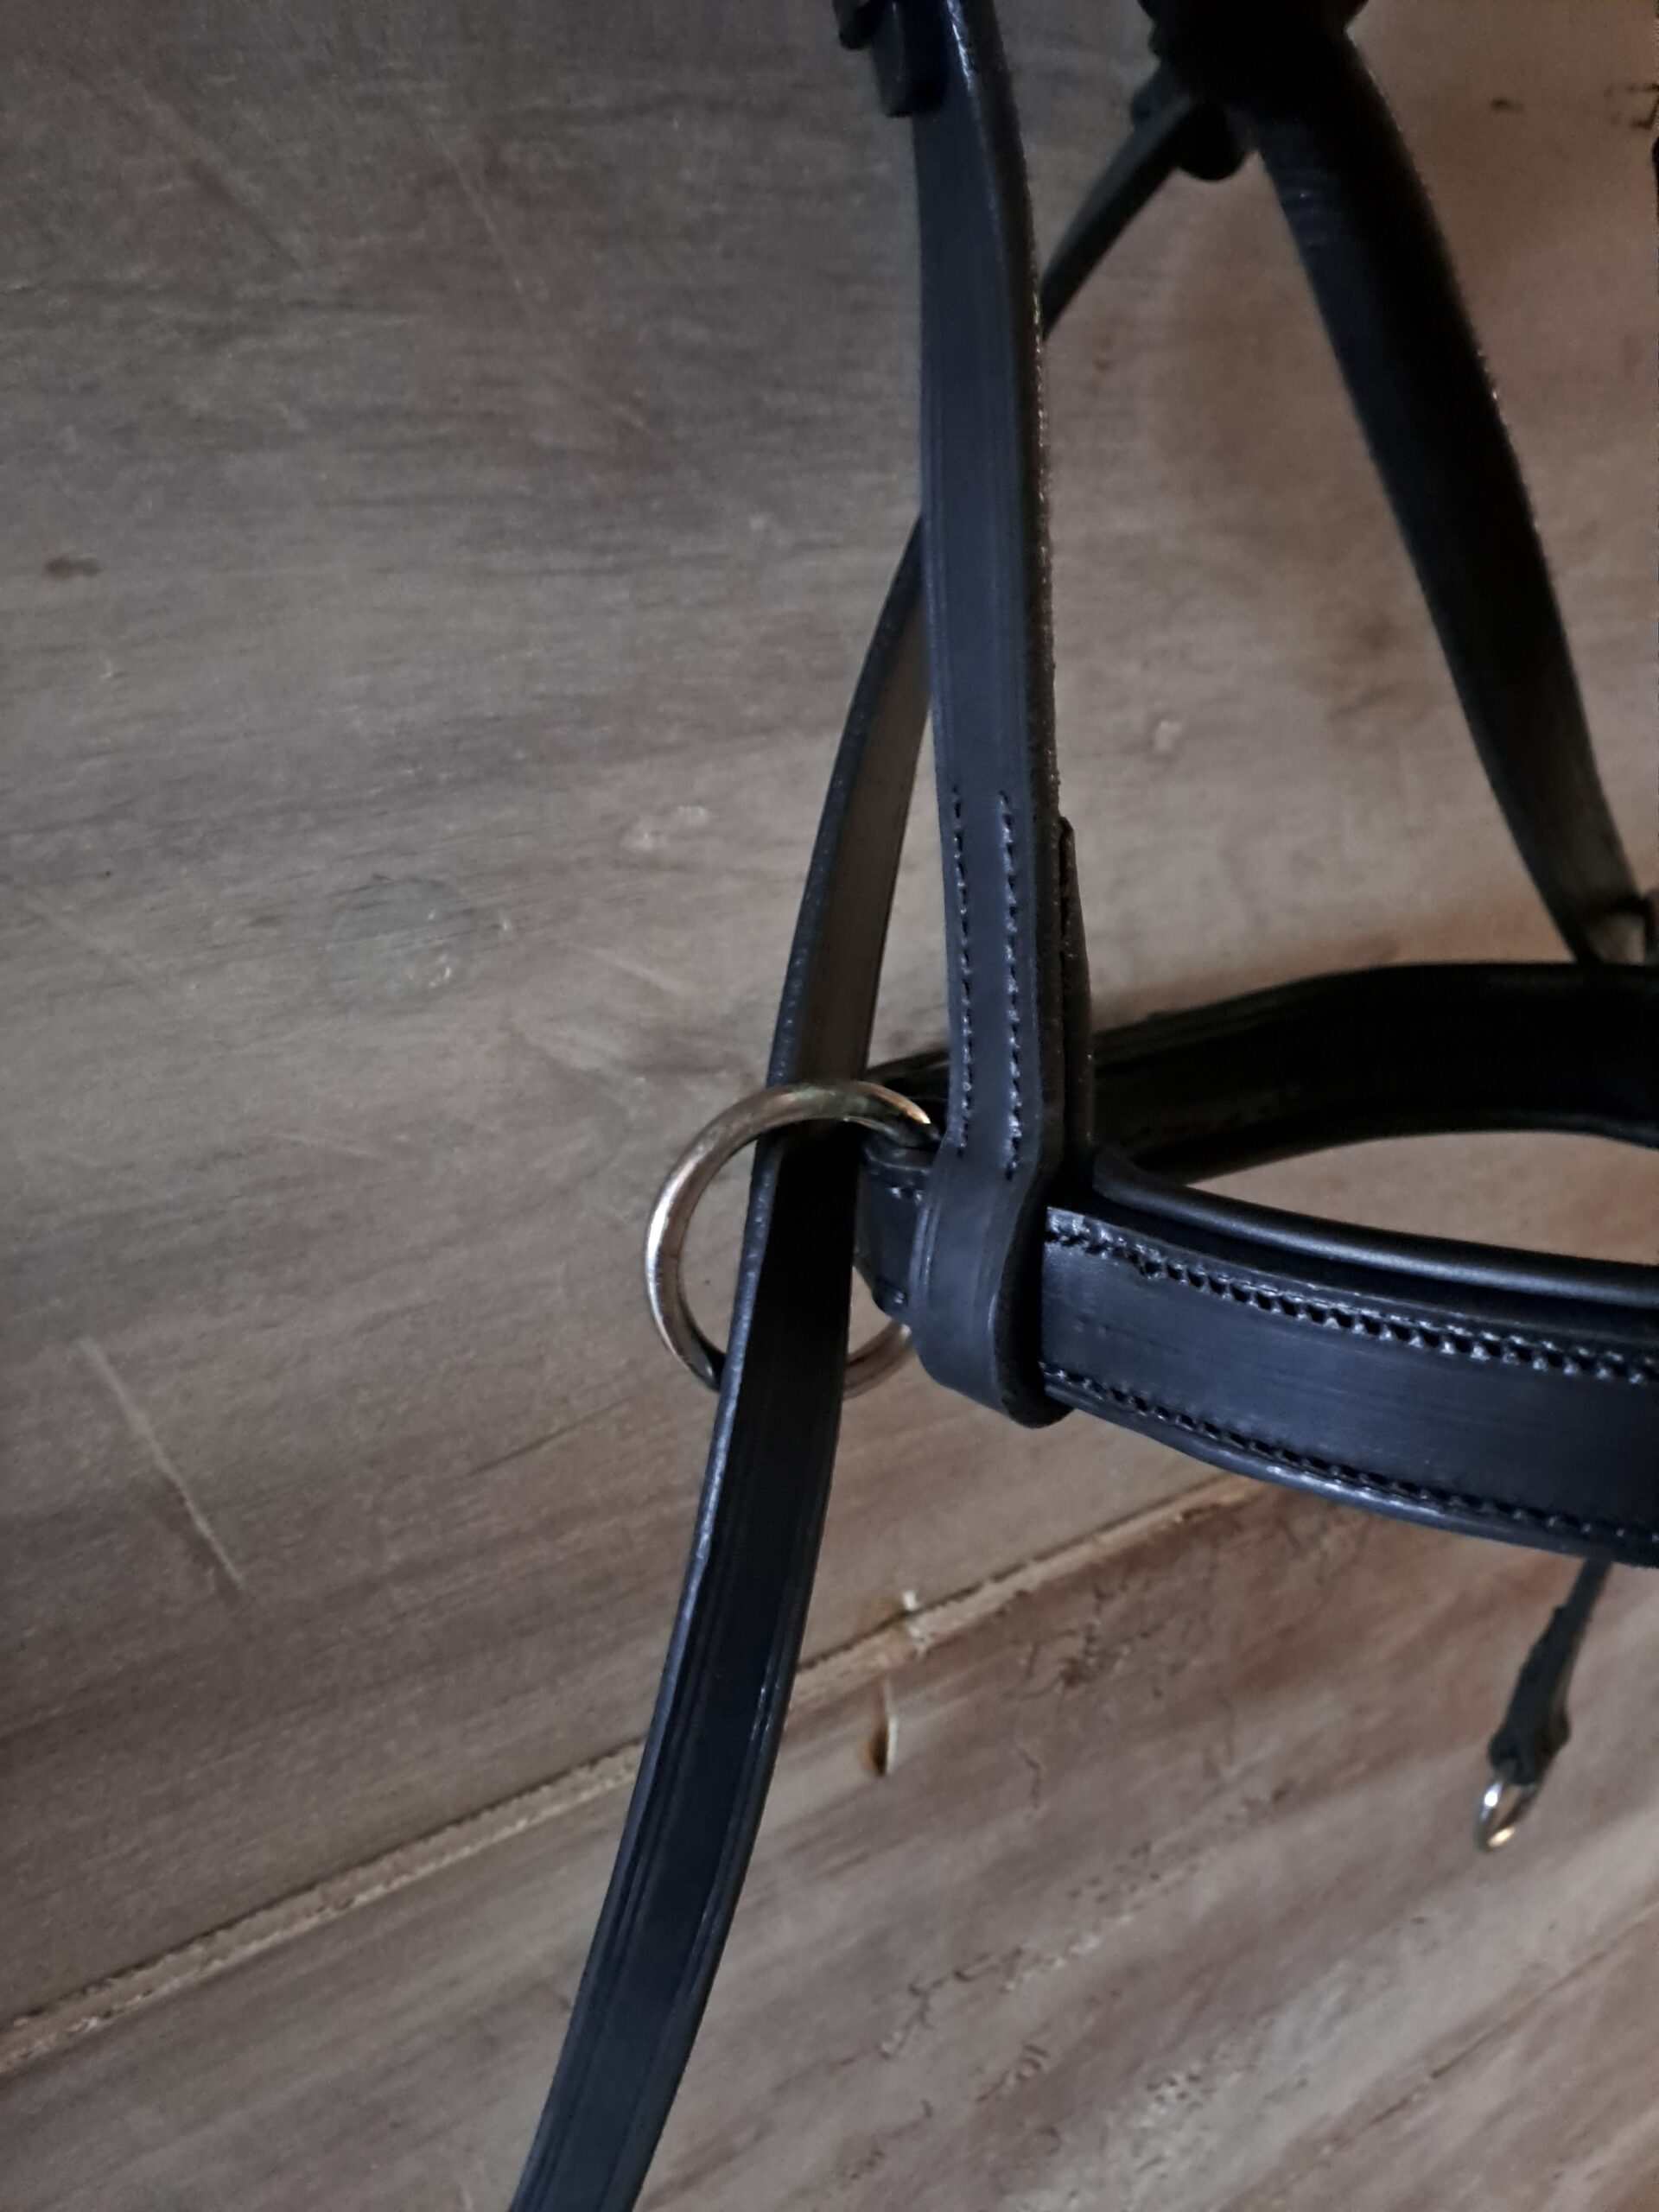 showing larger O rings fitted to the noseband of black leather padded bitless bridle